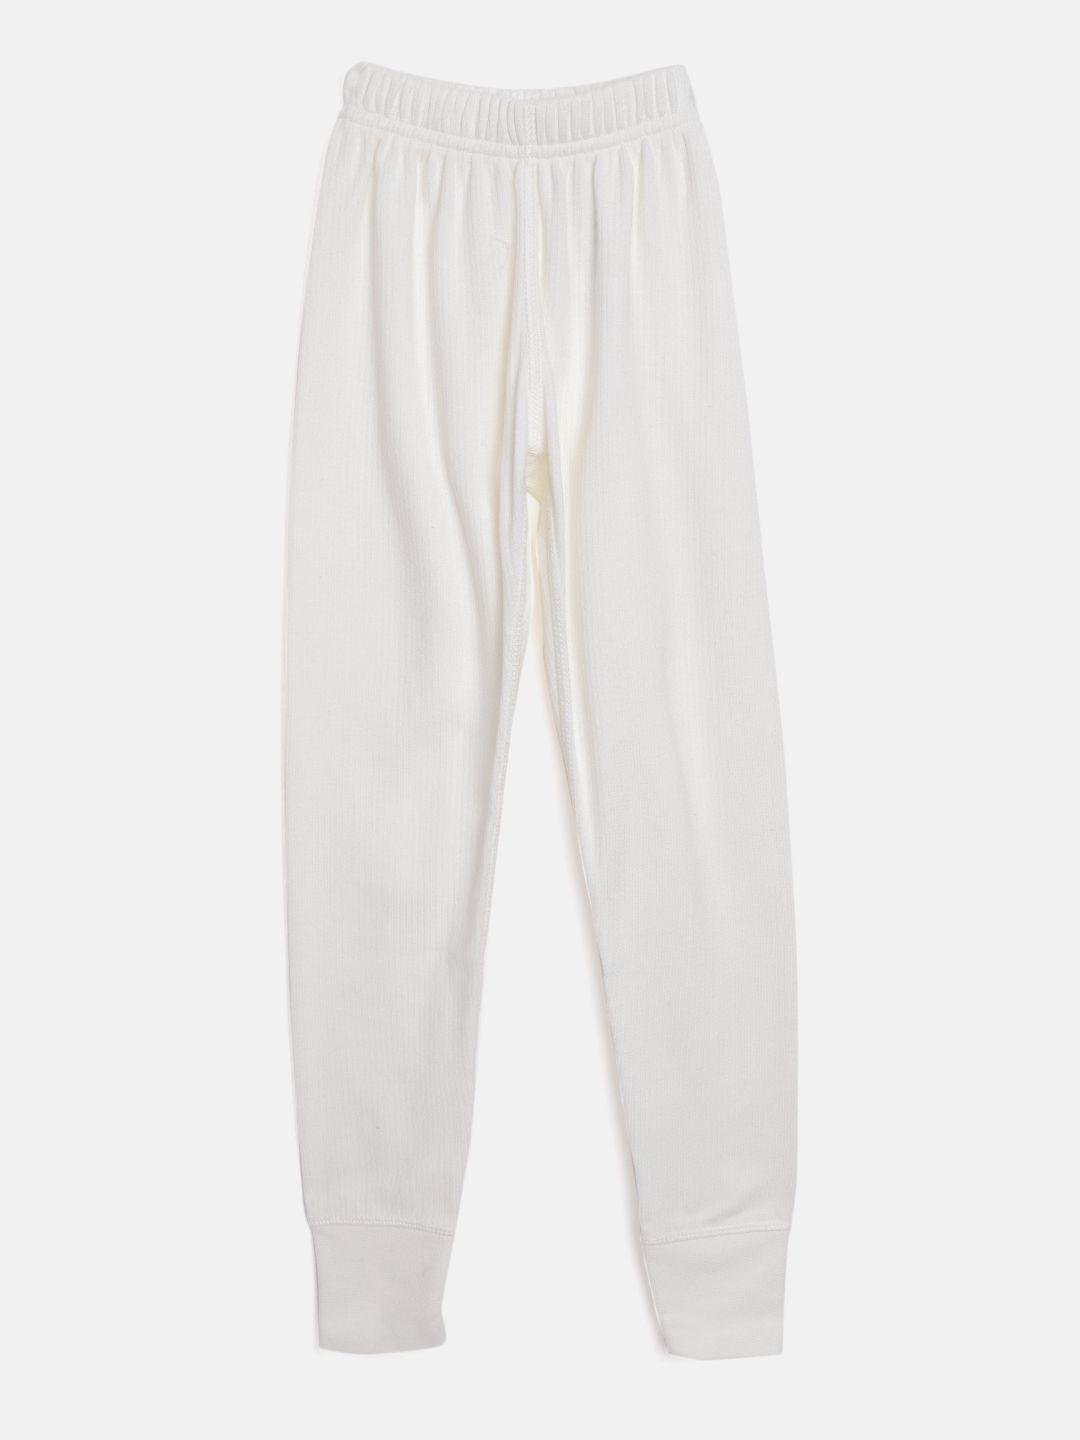 jockey kids off-white combed cotton solid thermal bottoms